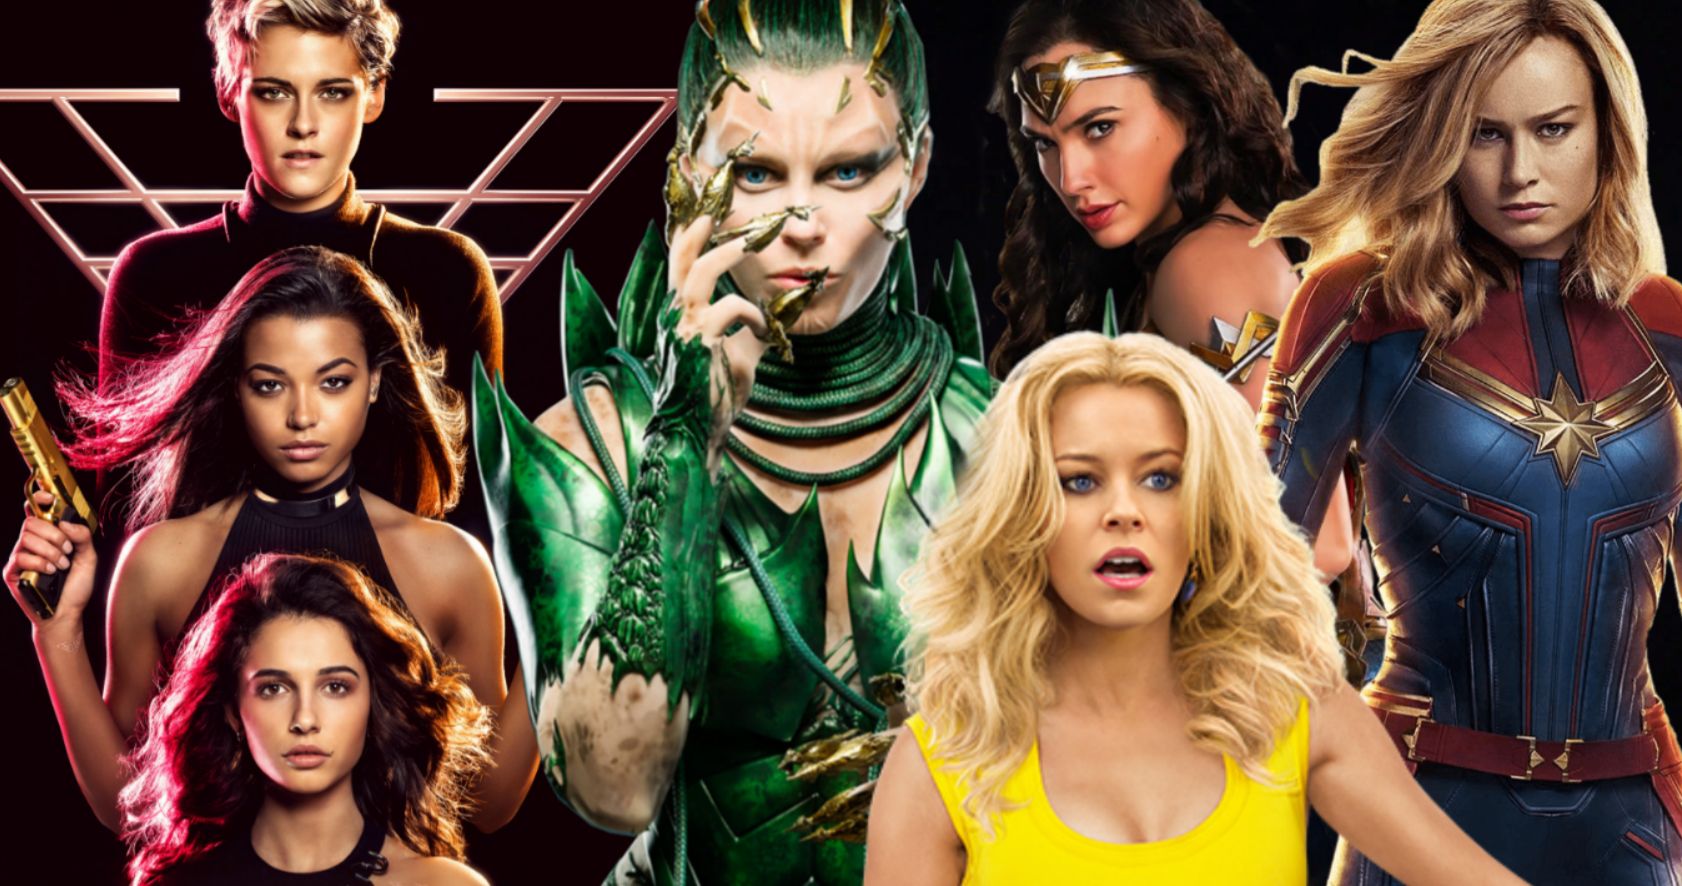 Charlie's Angels Director Fires Shots at the Success of Female Superhero Movies